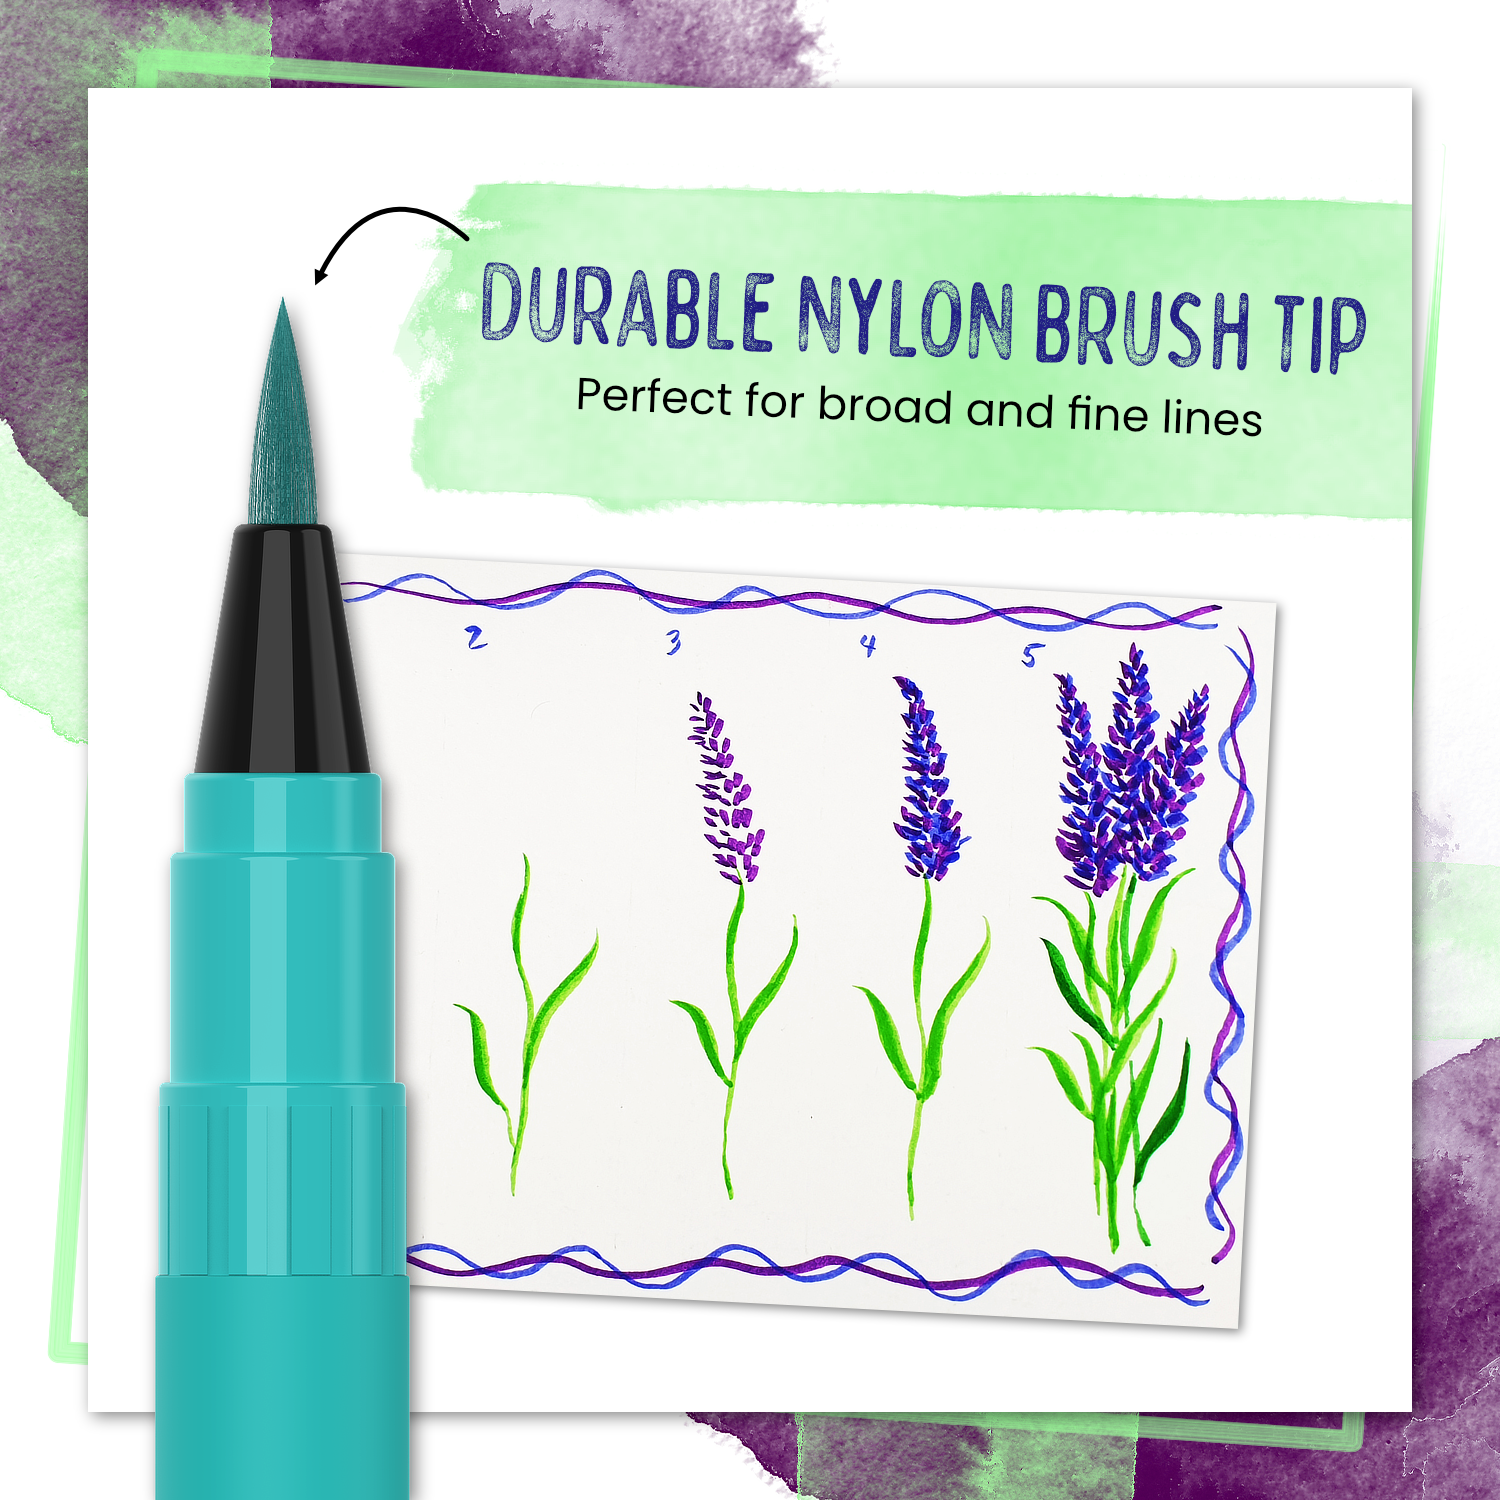 Get Inspired with These Watercolor Brush Pen Projects - Chalkola - Chalkola  Art Supply